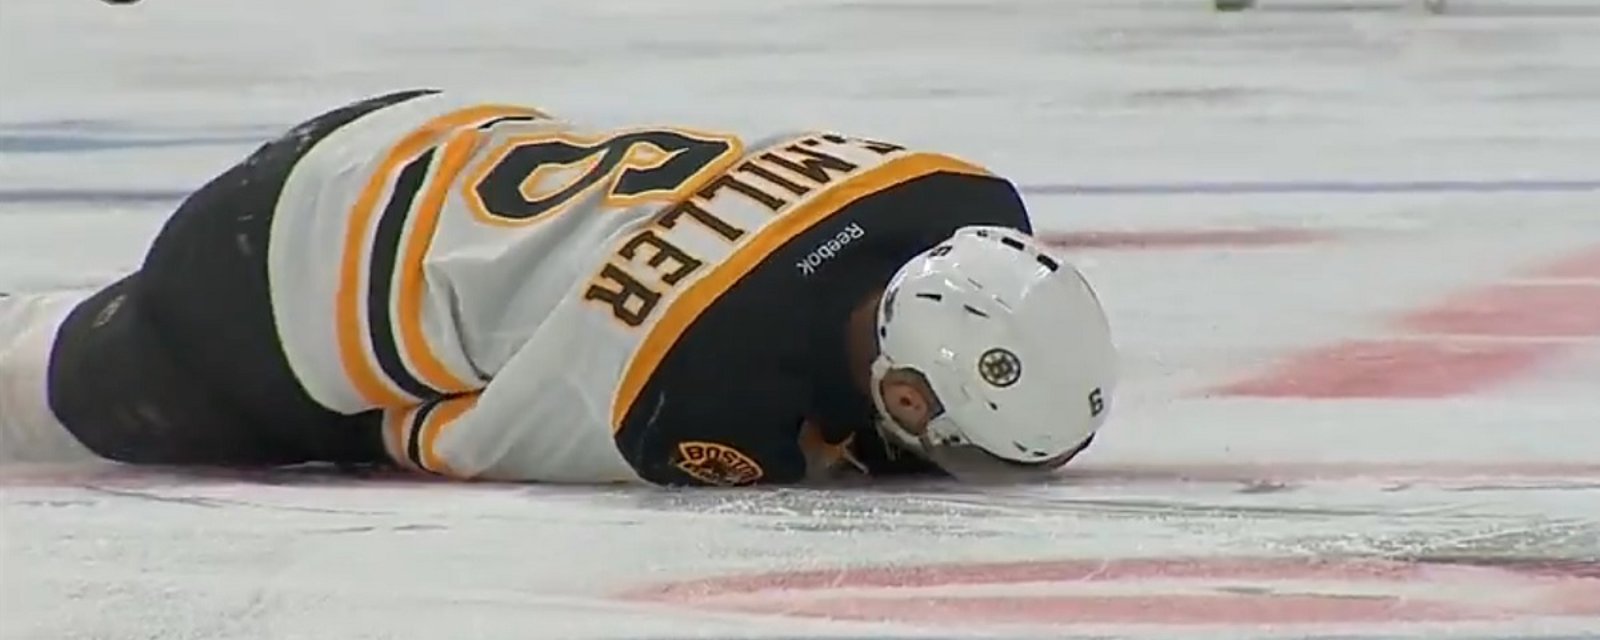 Breaking: Bruins appear to have lost another defenseman in early playoff injury. 